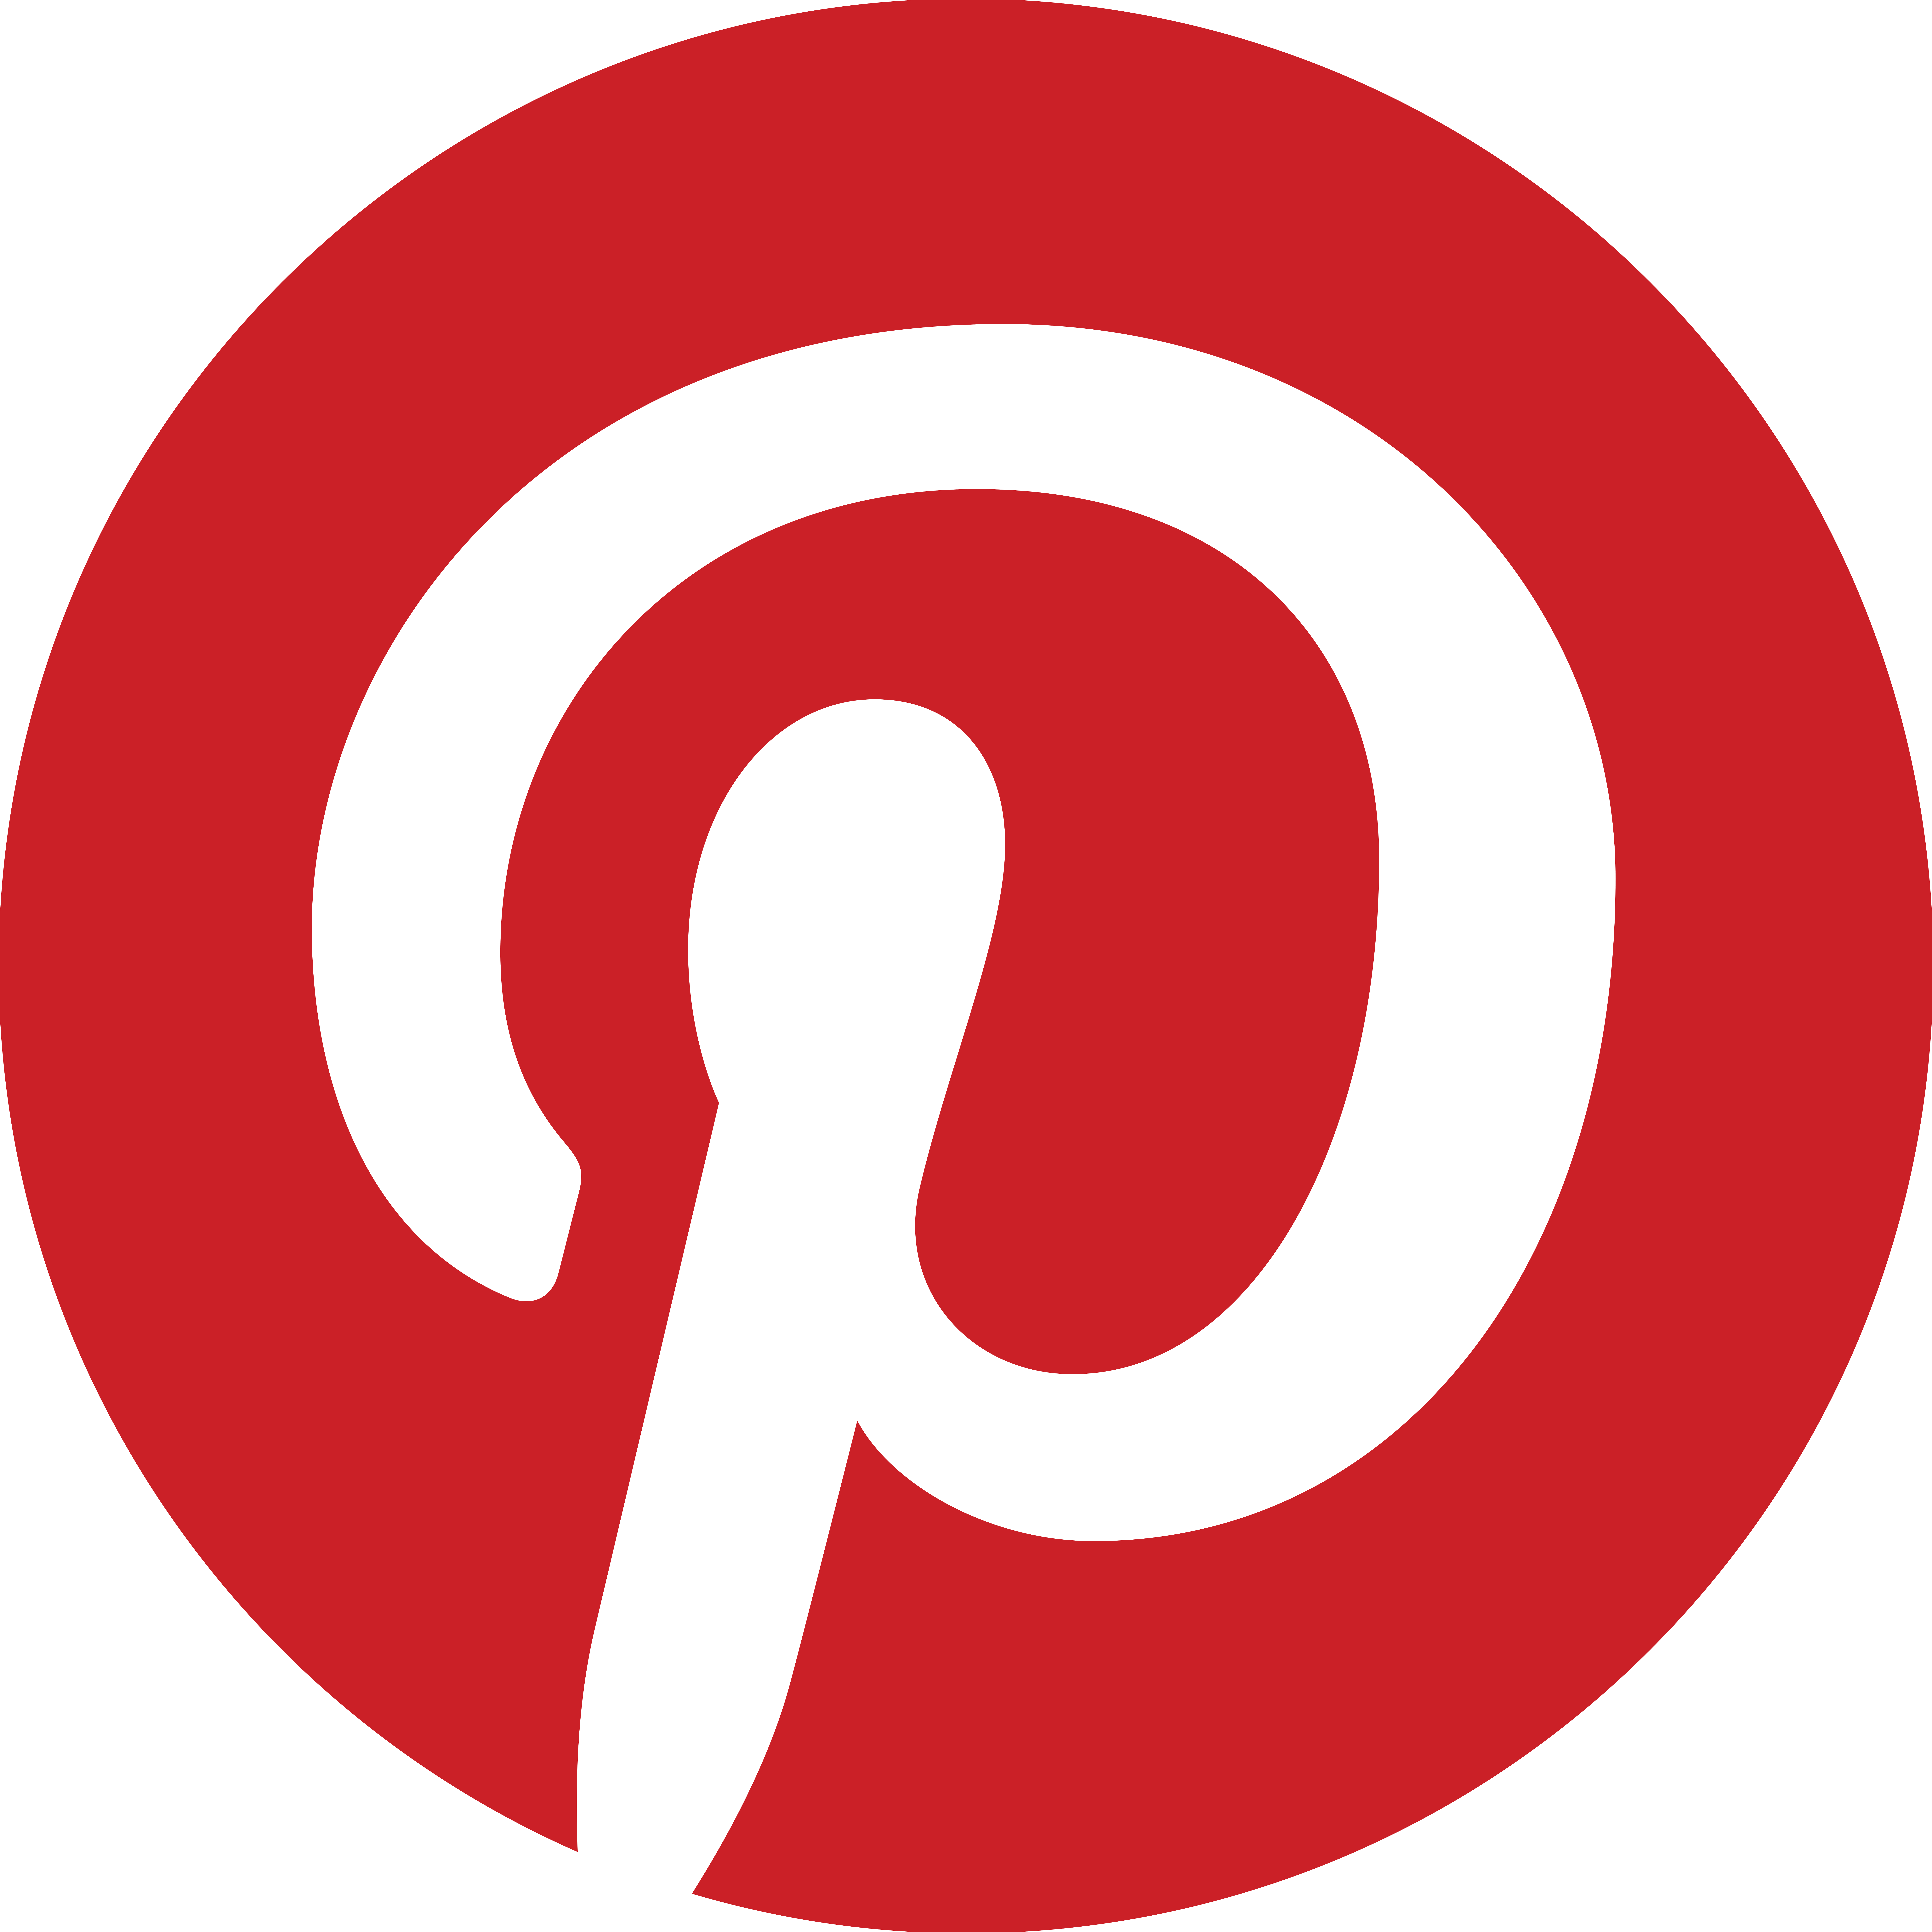 Connect with me on Pinterest